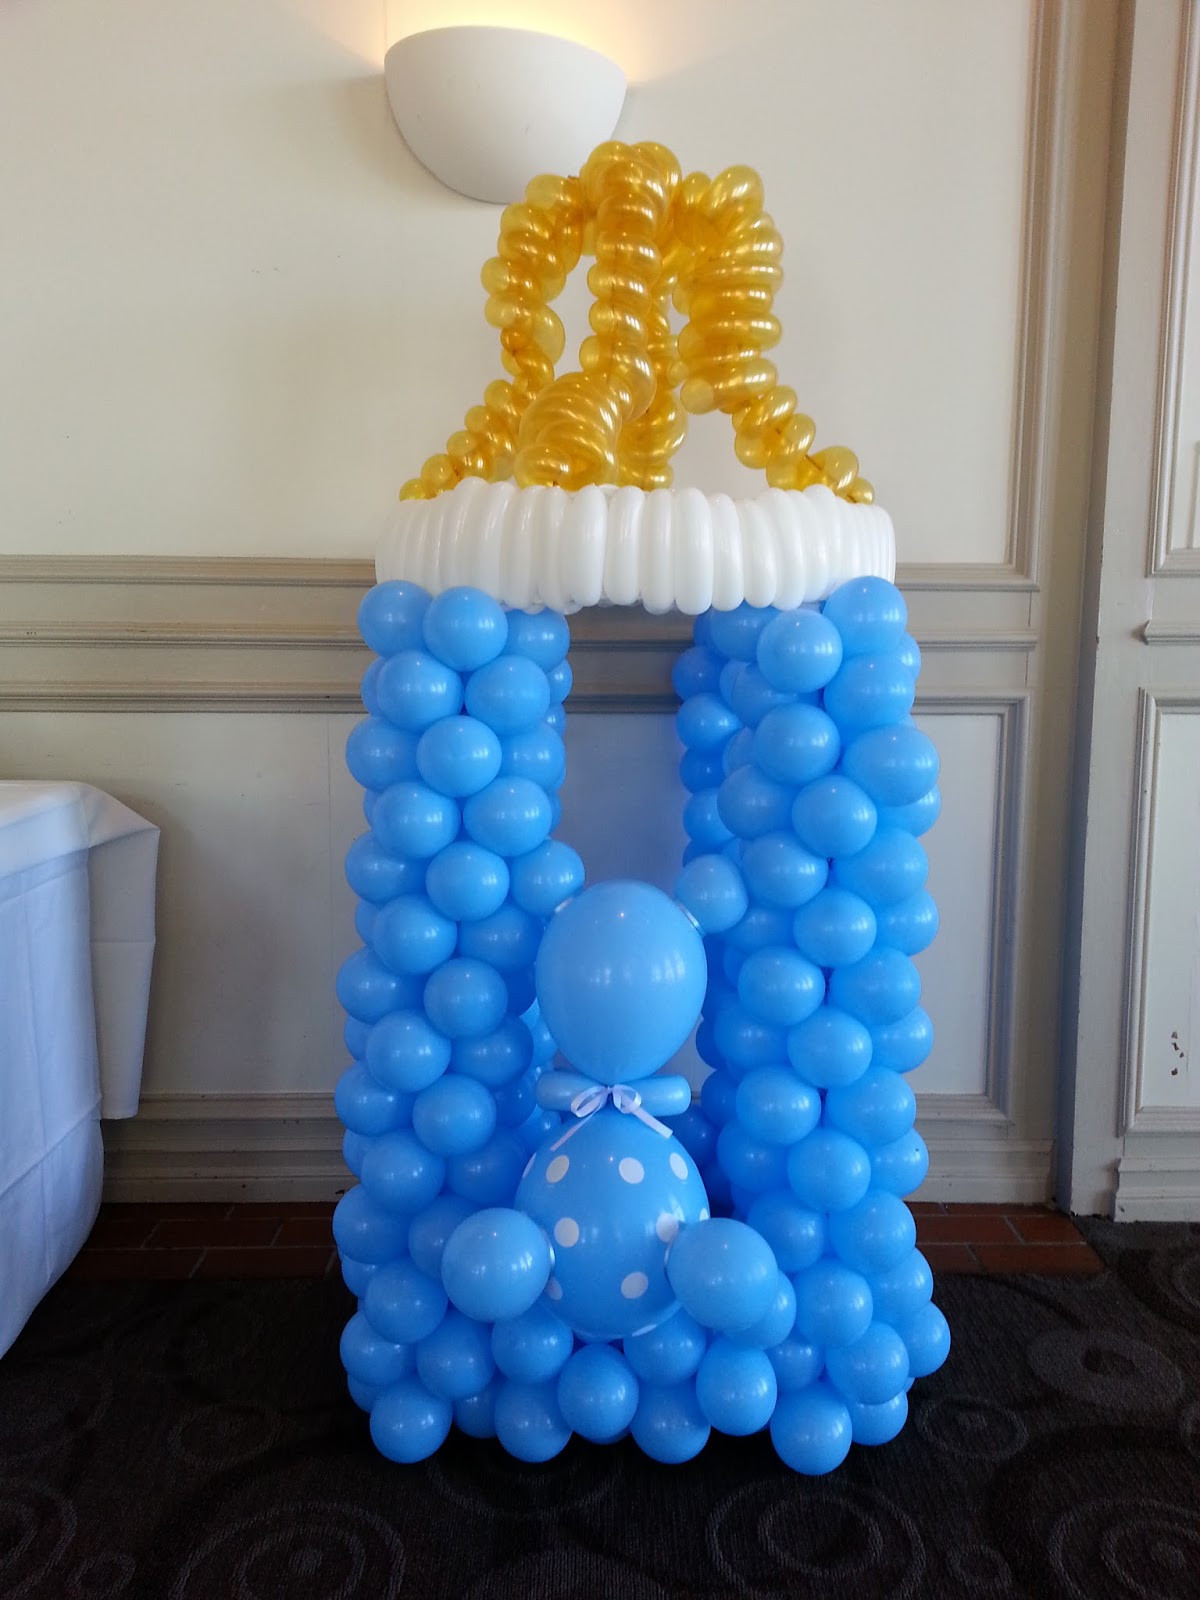 Baby Shower Decoration Ideas For A Boy
 PoP Balloons A baby shower for a boy